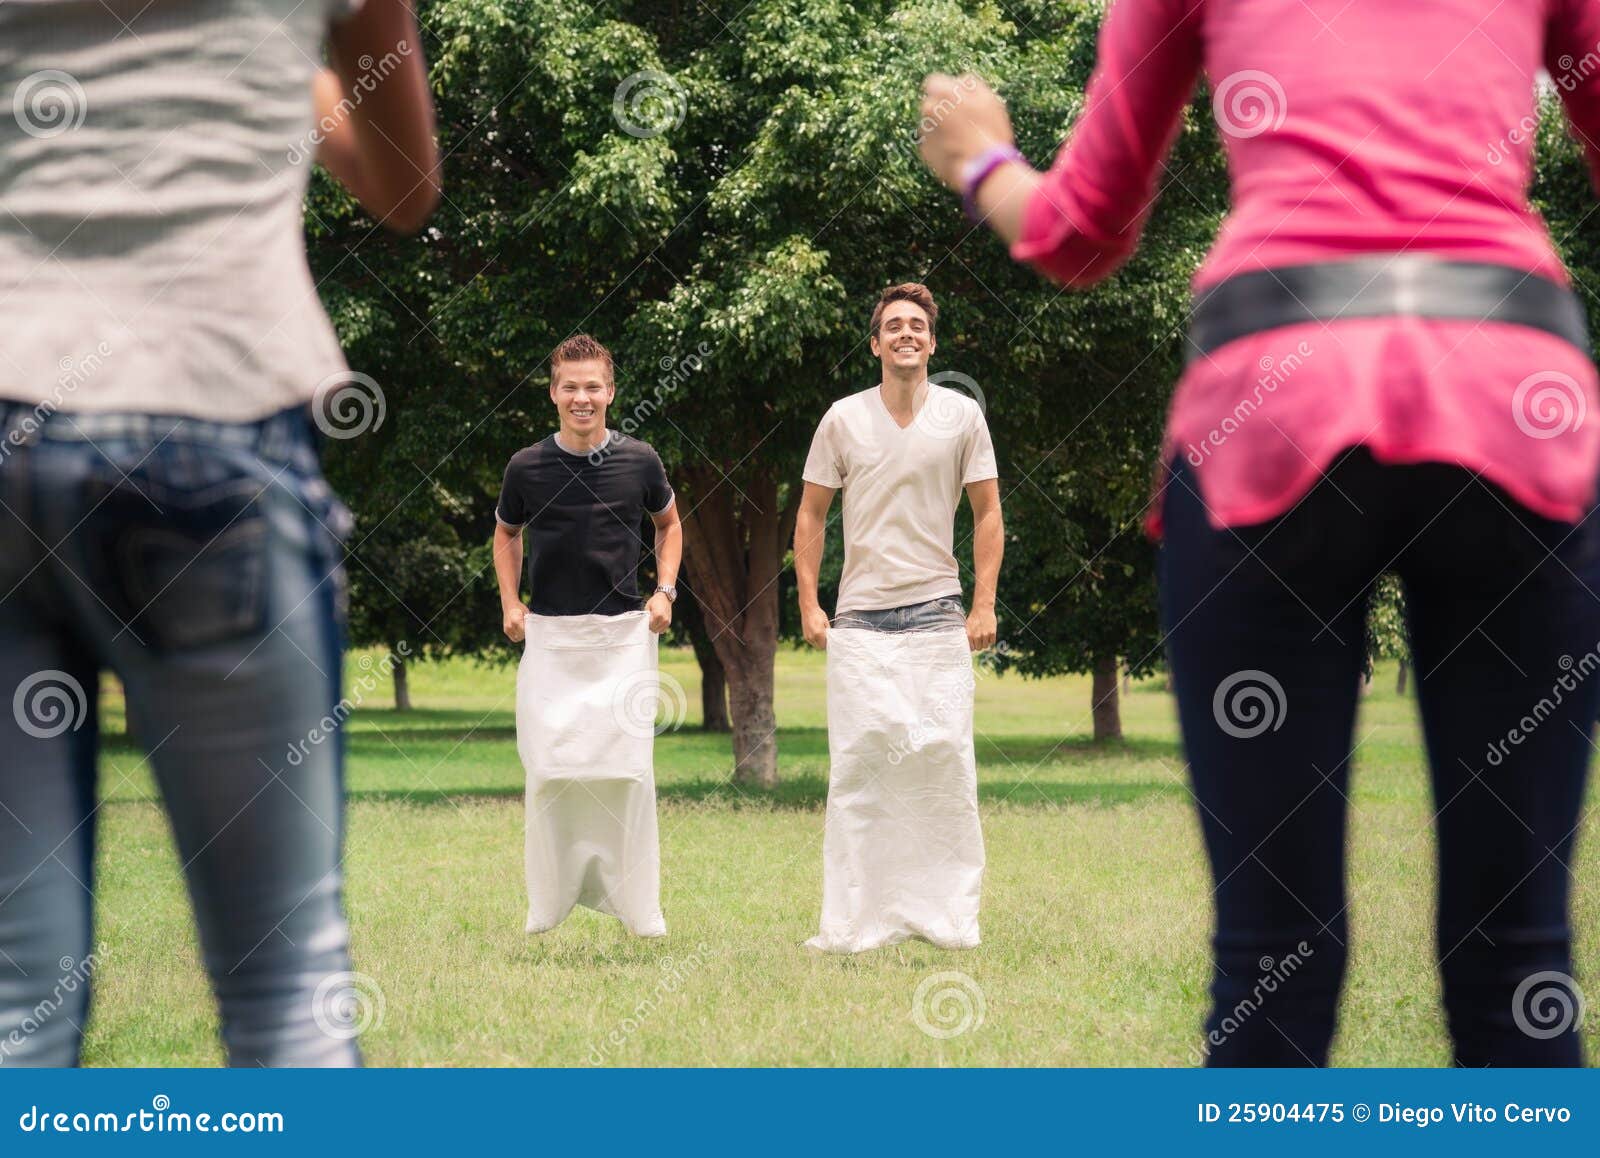 Men Playing Sack Race with Girlfriends Cheering Stock Image - Image of ...